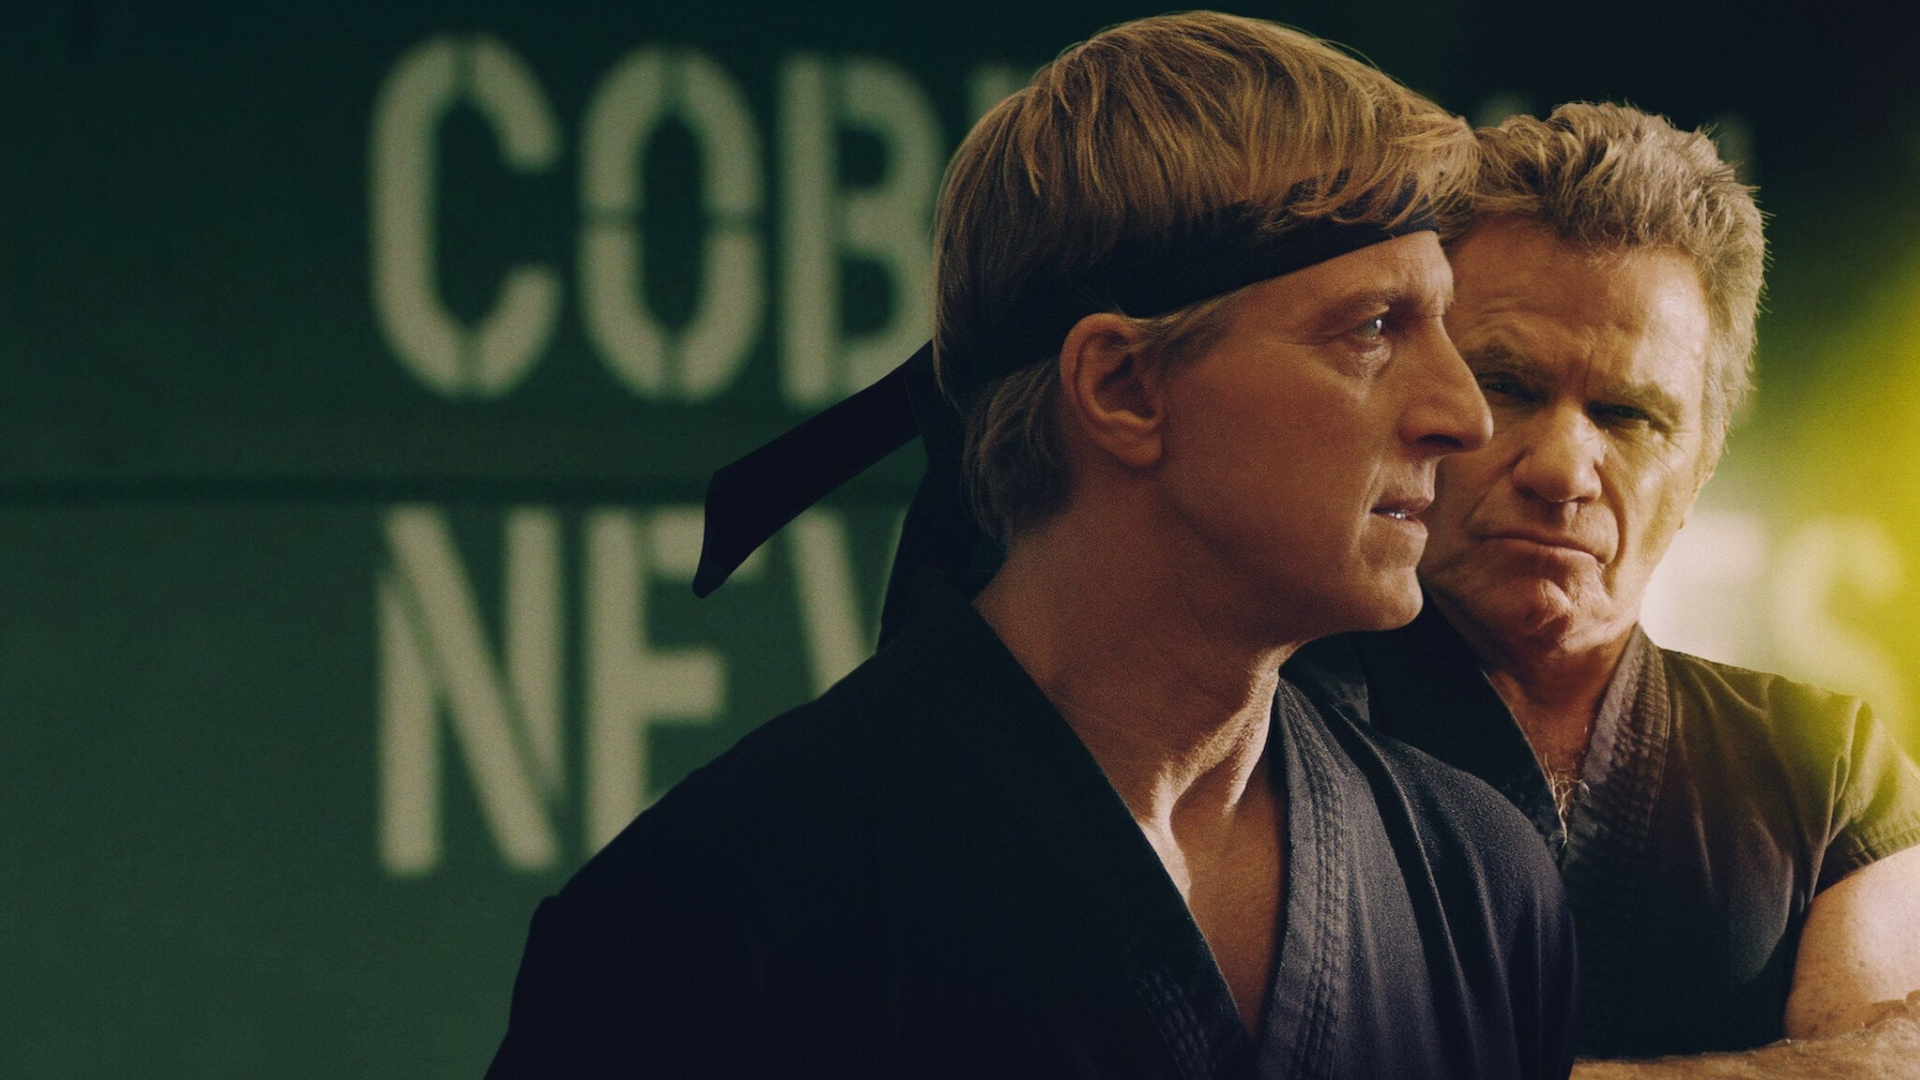 Is there a way to watch “Cobra Kai” without bad language?